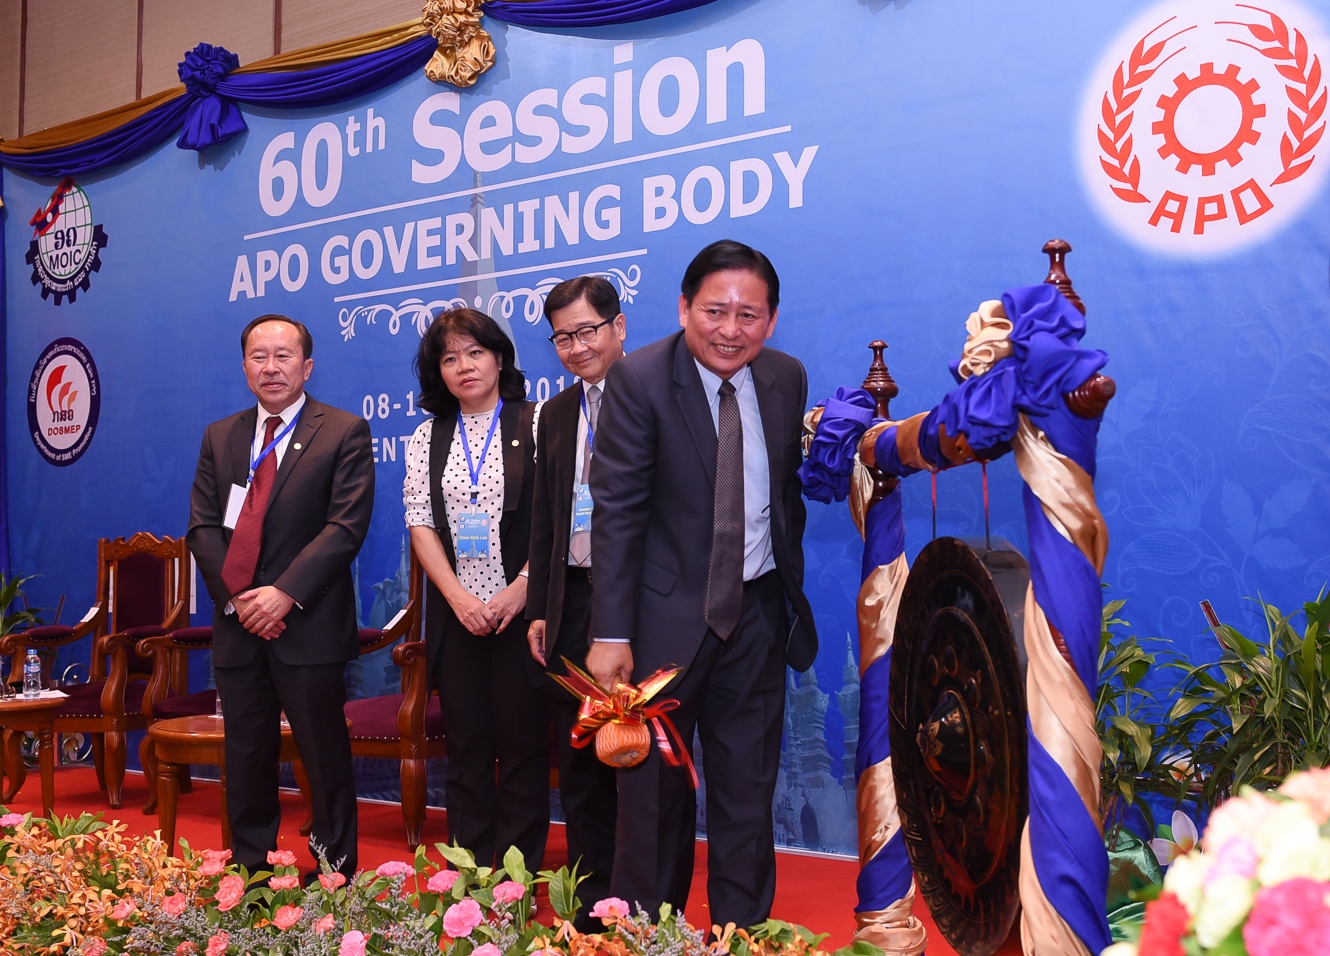 Deputy Minister of Industry and Commerce Somchith Inthamith of Lao PDR beating the goan to formally inaugurate the 60th session of the Governing Body in Vientiane, Lao PDR, 8 May 2018.